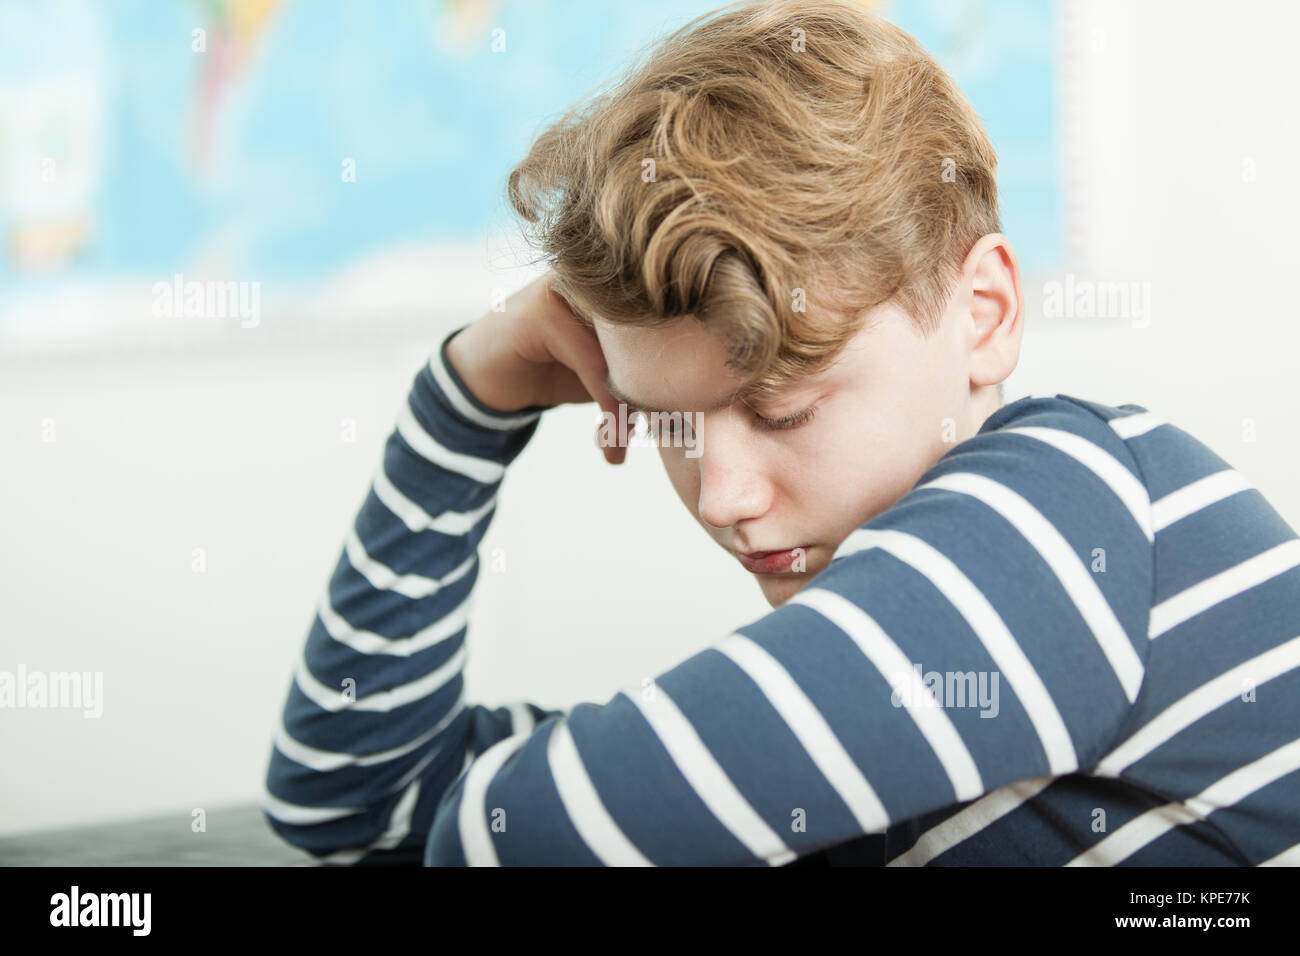 Bored Boy with Head Leaning on Hand in Class Stock Photo